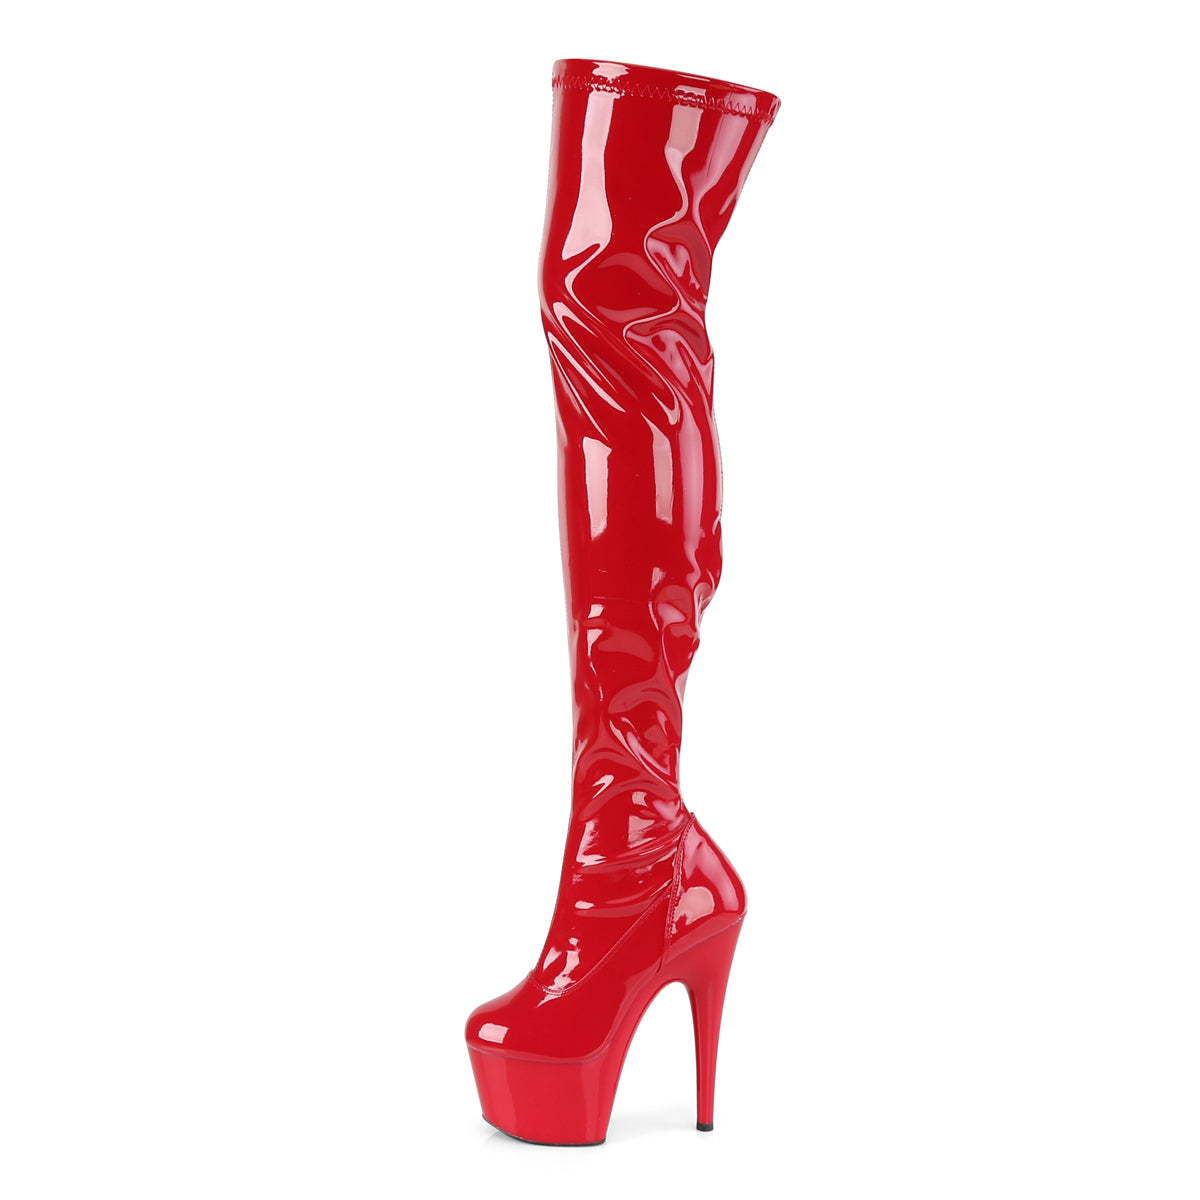 ADORE-3000 Pleaser 7 Inch Heel Red Pole Dancing Thigh Highs-Pleaser- Sexy Shoes Pole Dance Heels